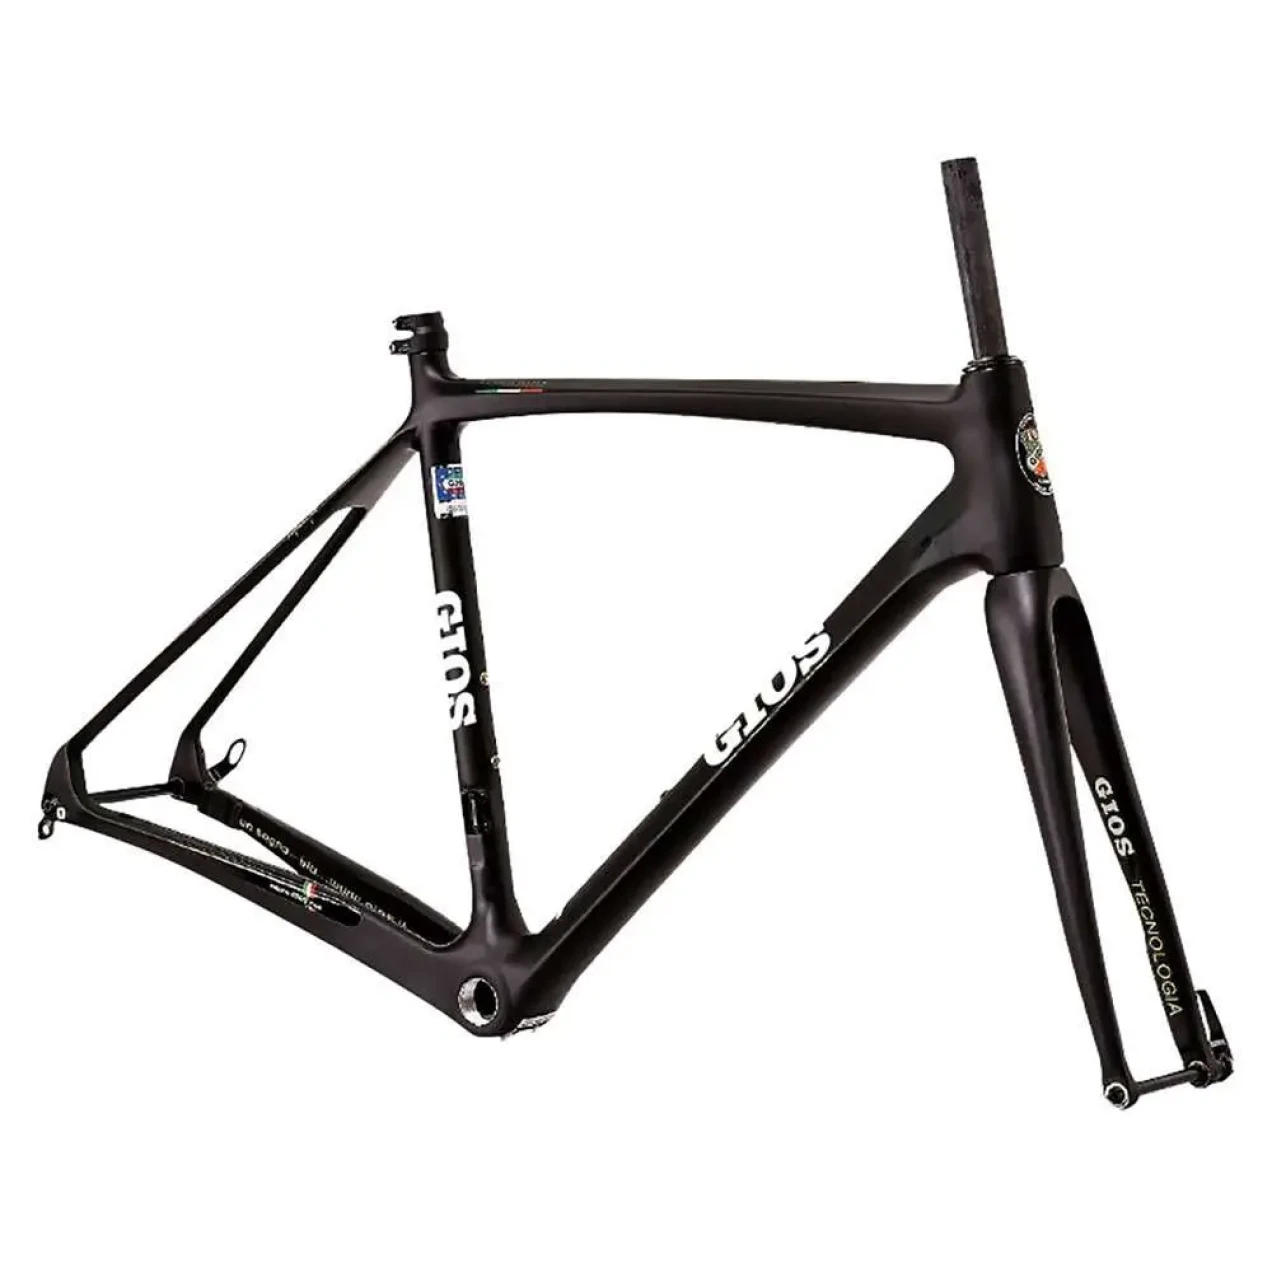 Disc Sram Force Disc brugt i 54 cm buycycle